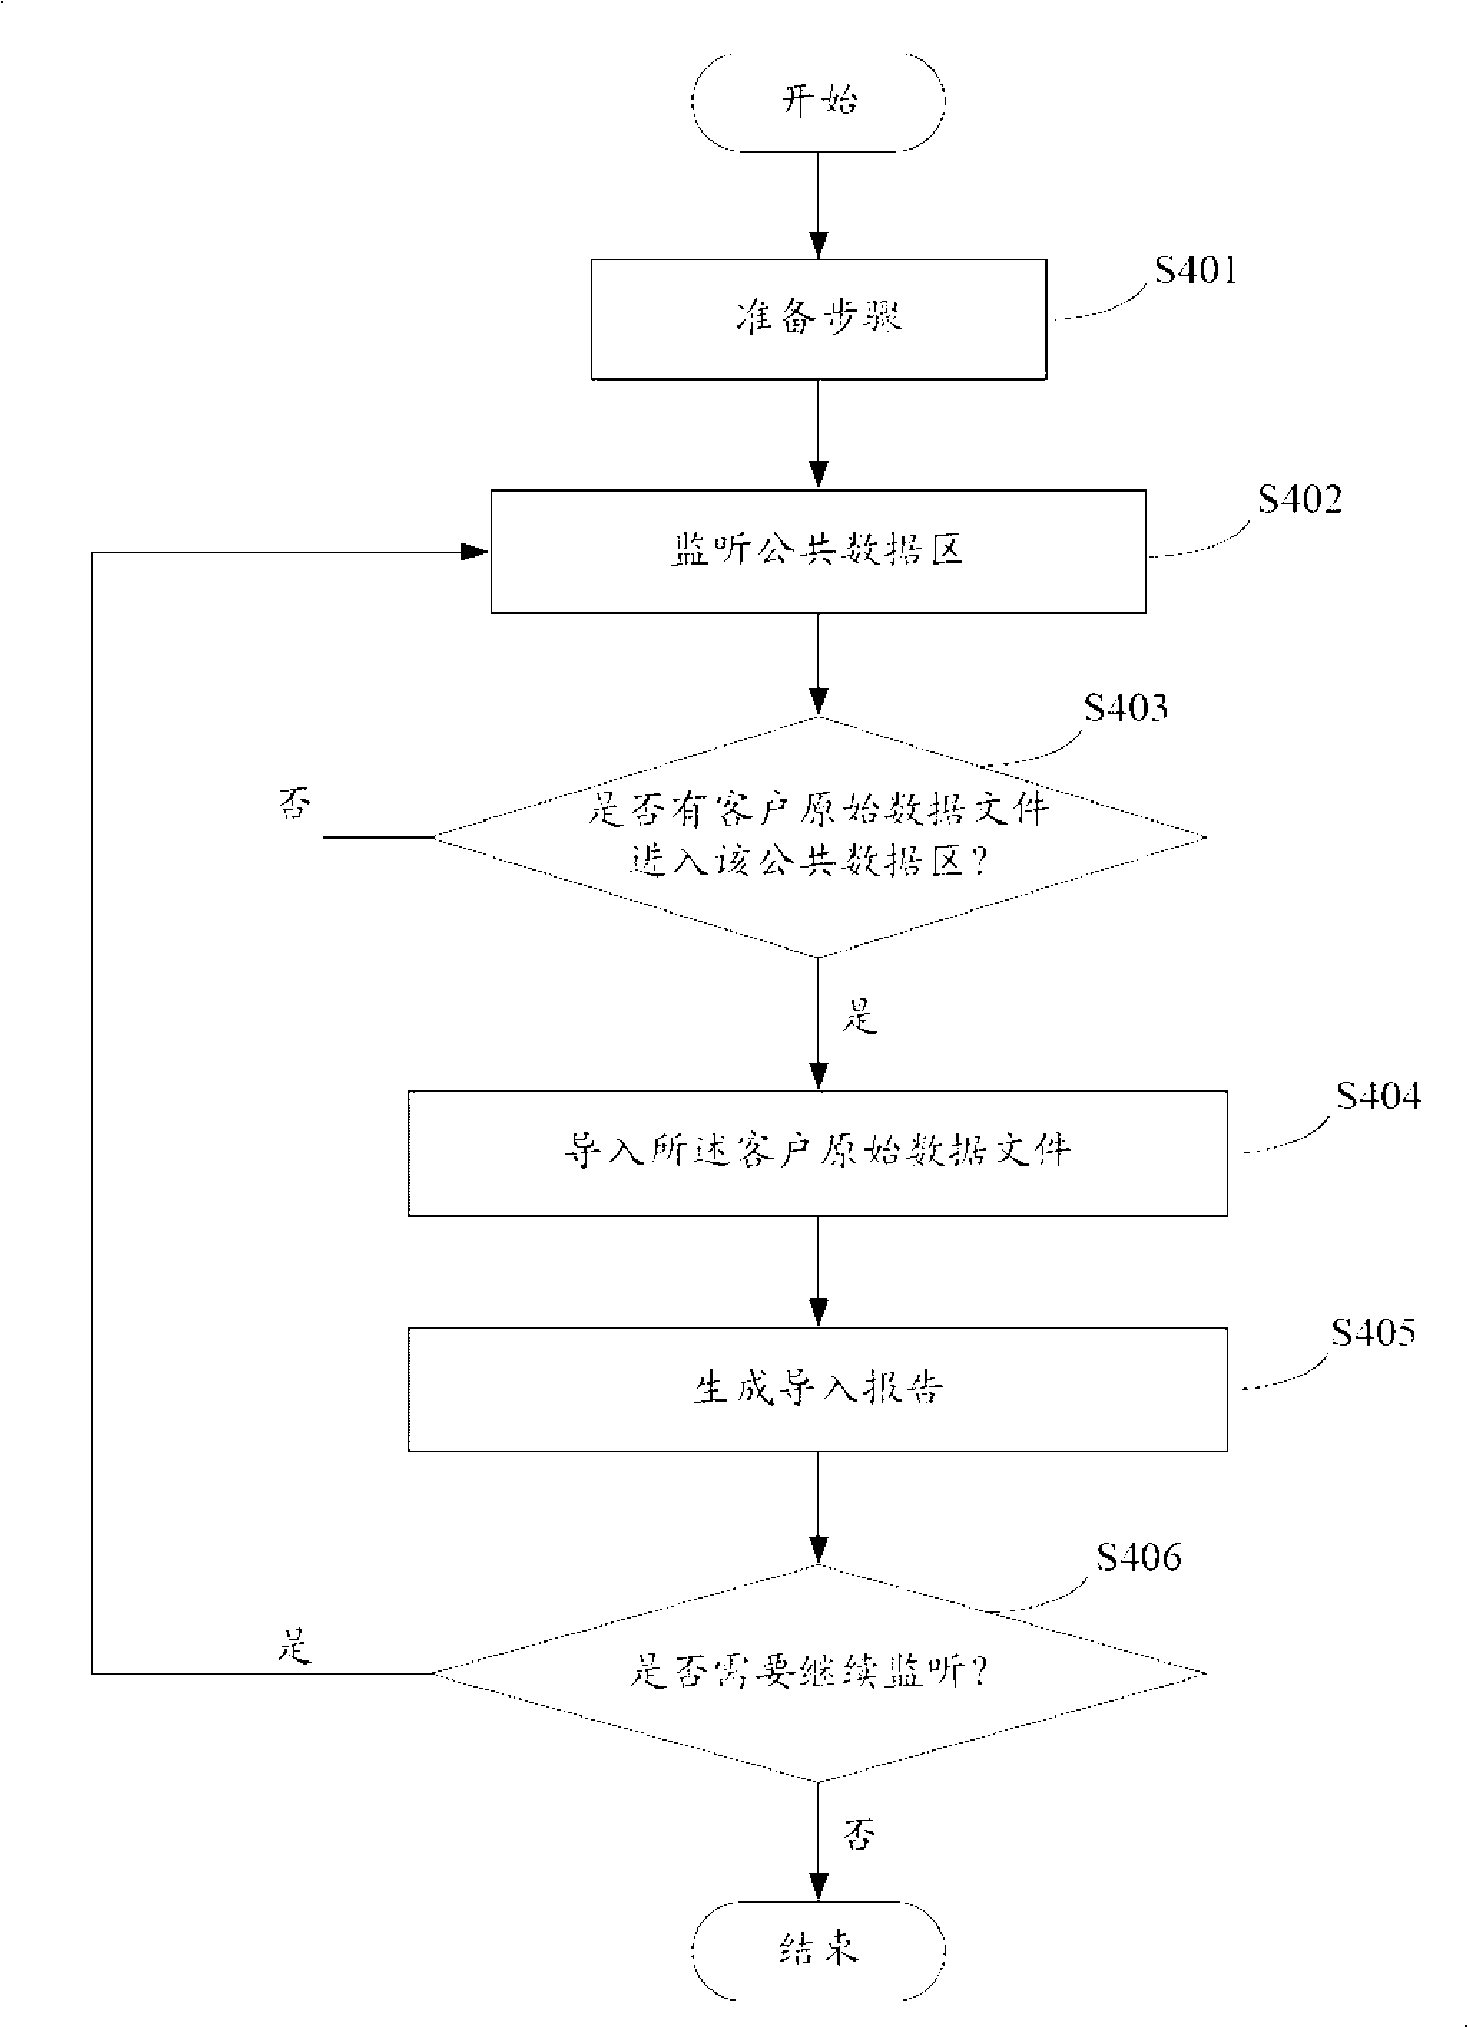 System and method for leading in data